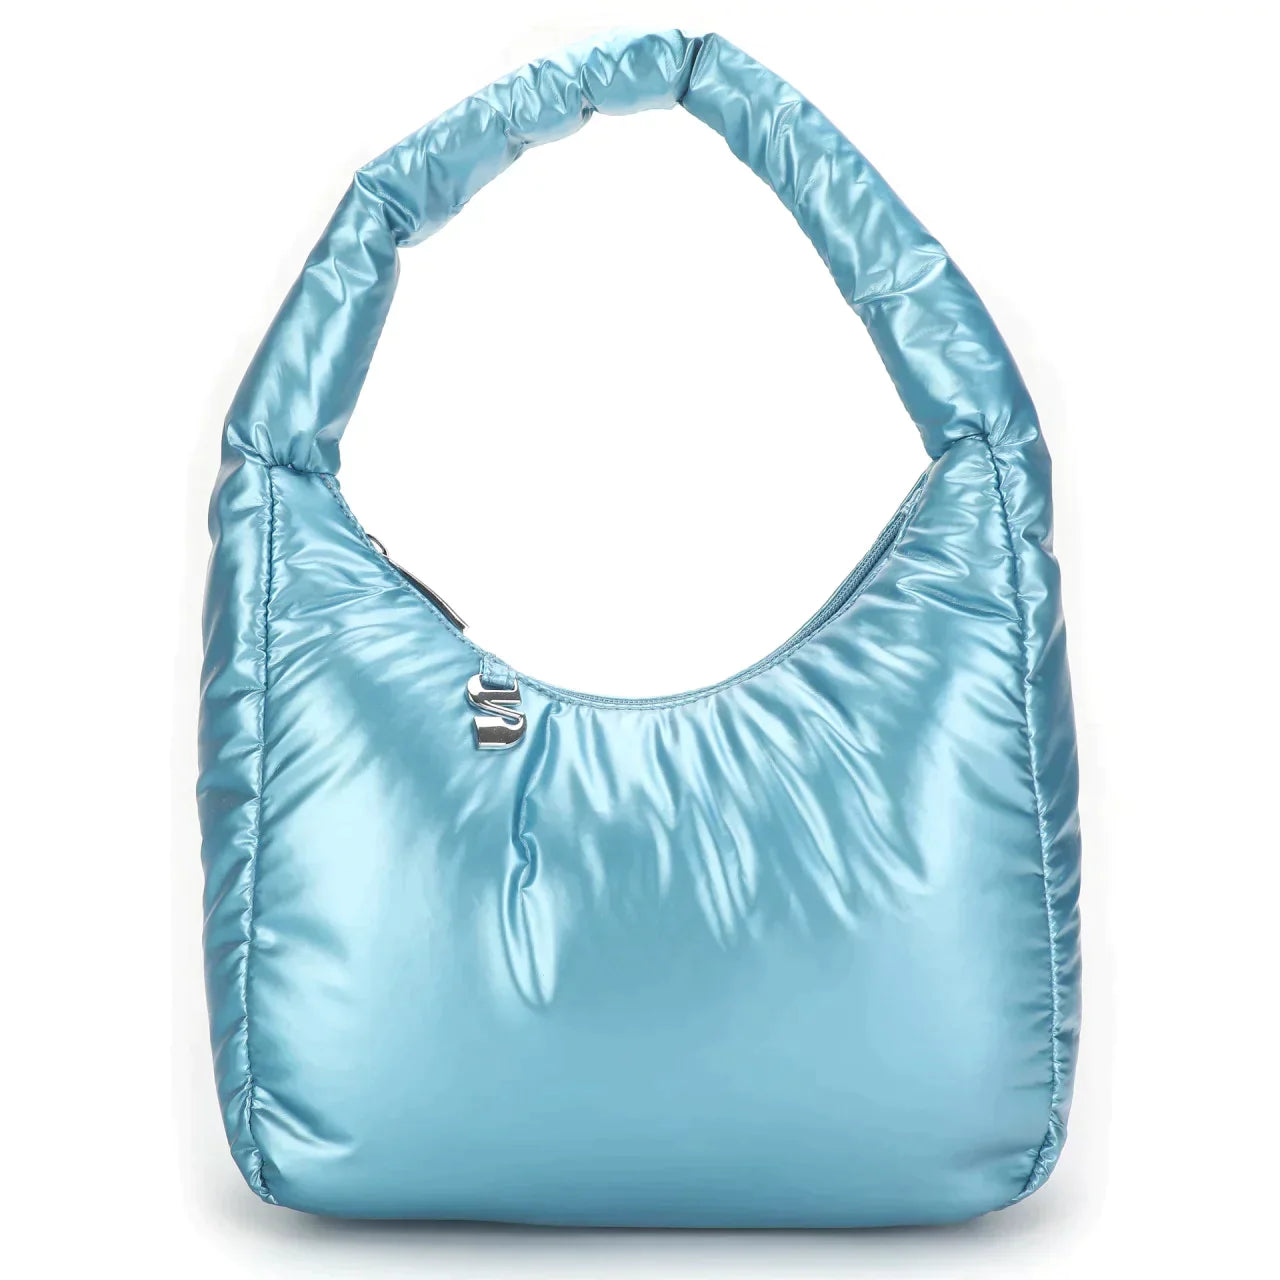 THE SOFIA PADDED MINI SHOULDER BAG - SHINY BLUE - EXCLUSIVE Bags from SILFEN - Just €62! SHOP NOW AT IAMINHATELOVE BOTH IN STORE FOR CYPRUS AND ONLINE WORLDWIDE @ IAMINHATELOVE.COM